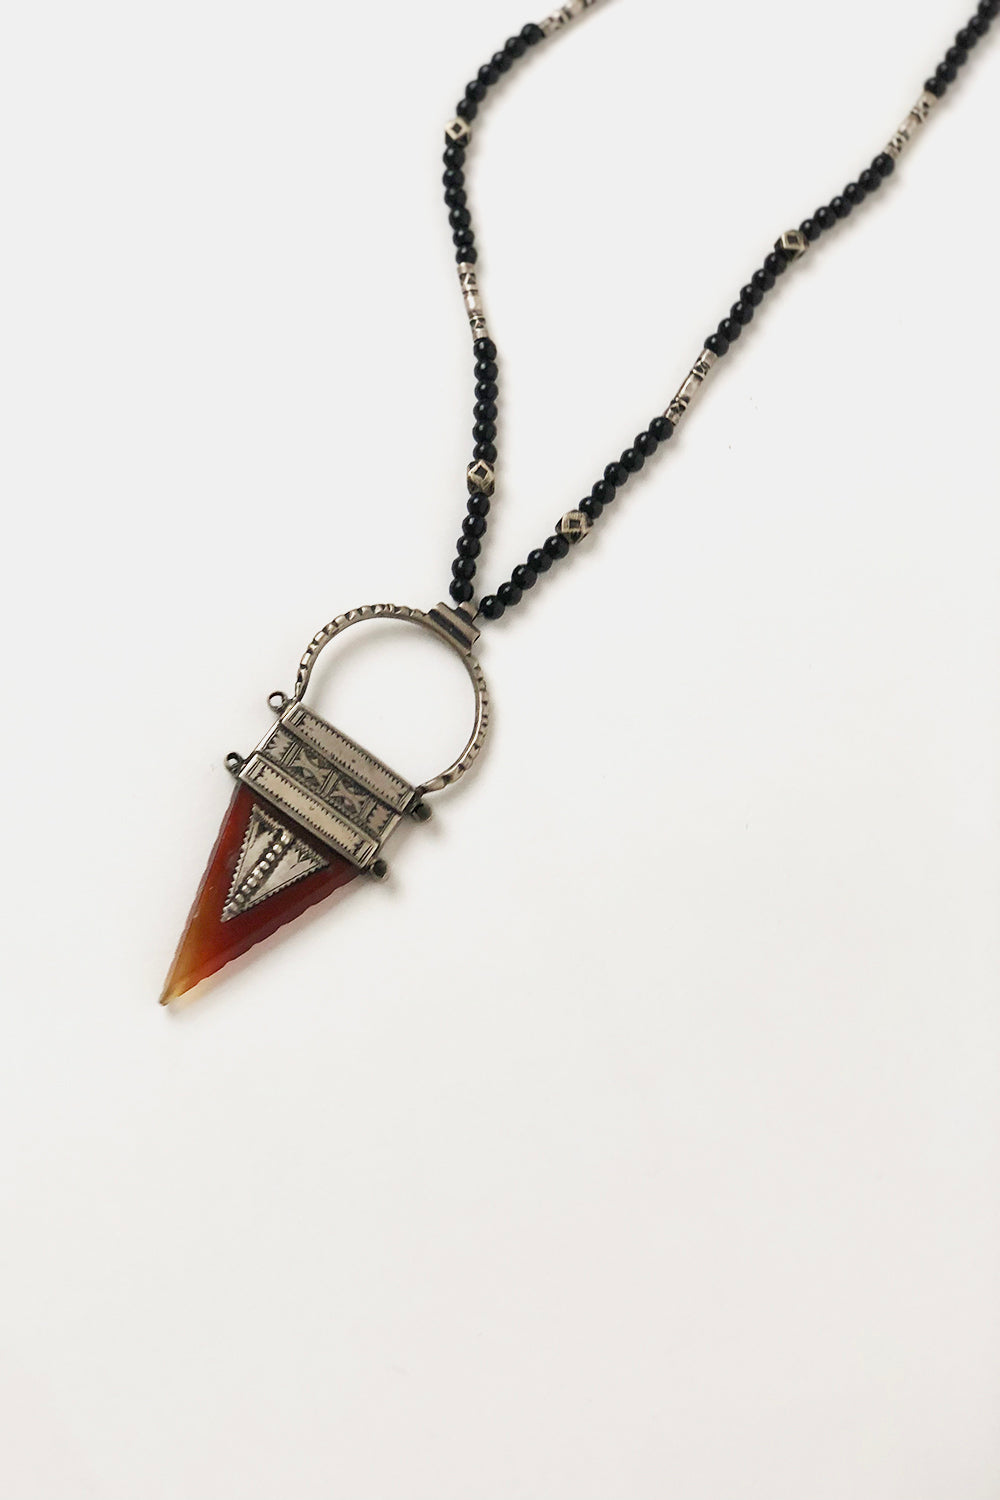 Vintage Black Glass and Carnelian Necklace